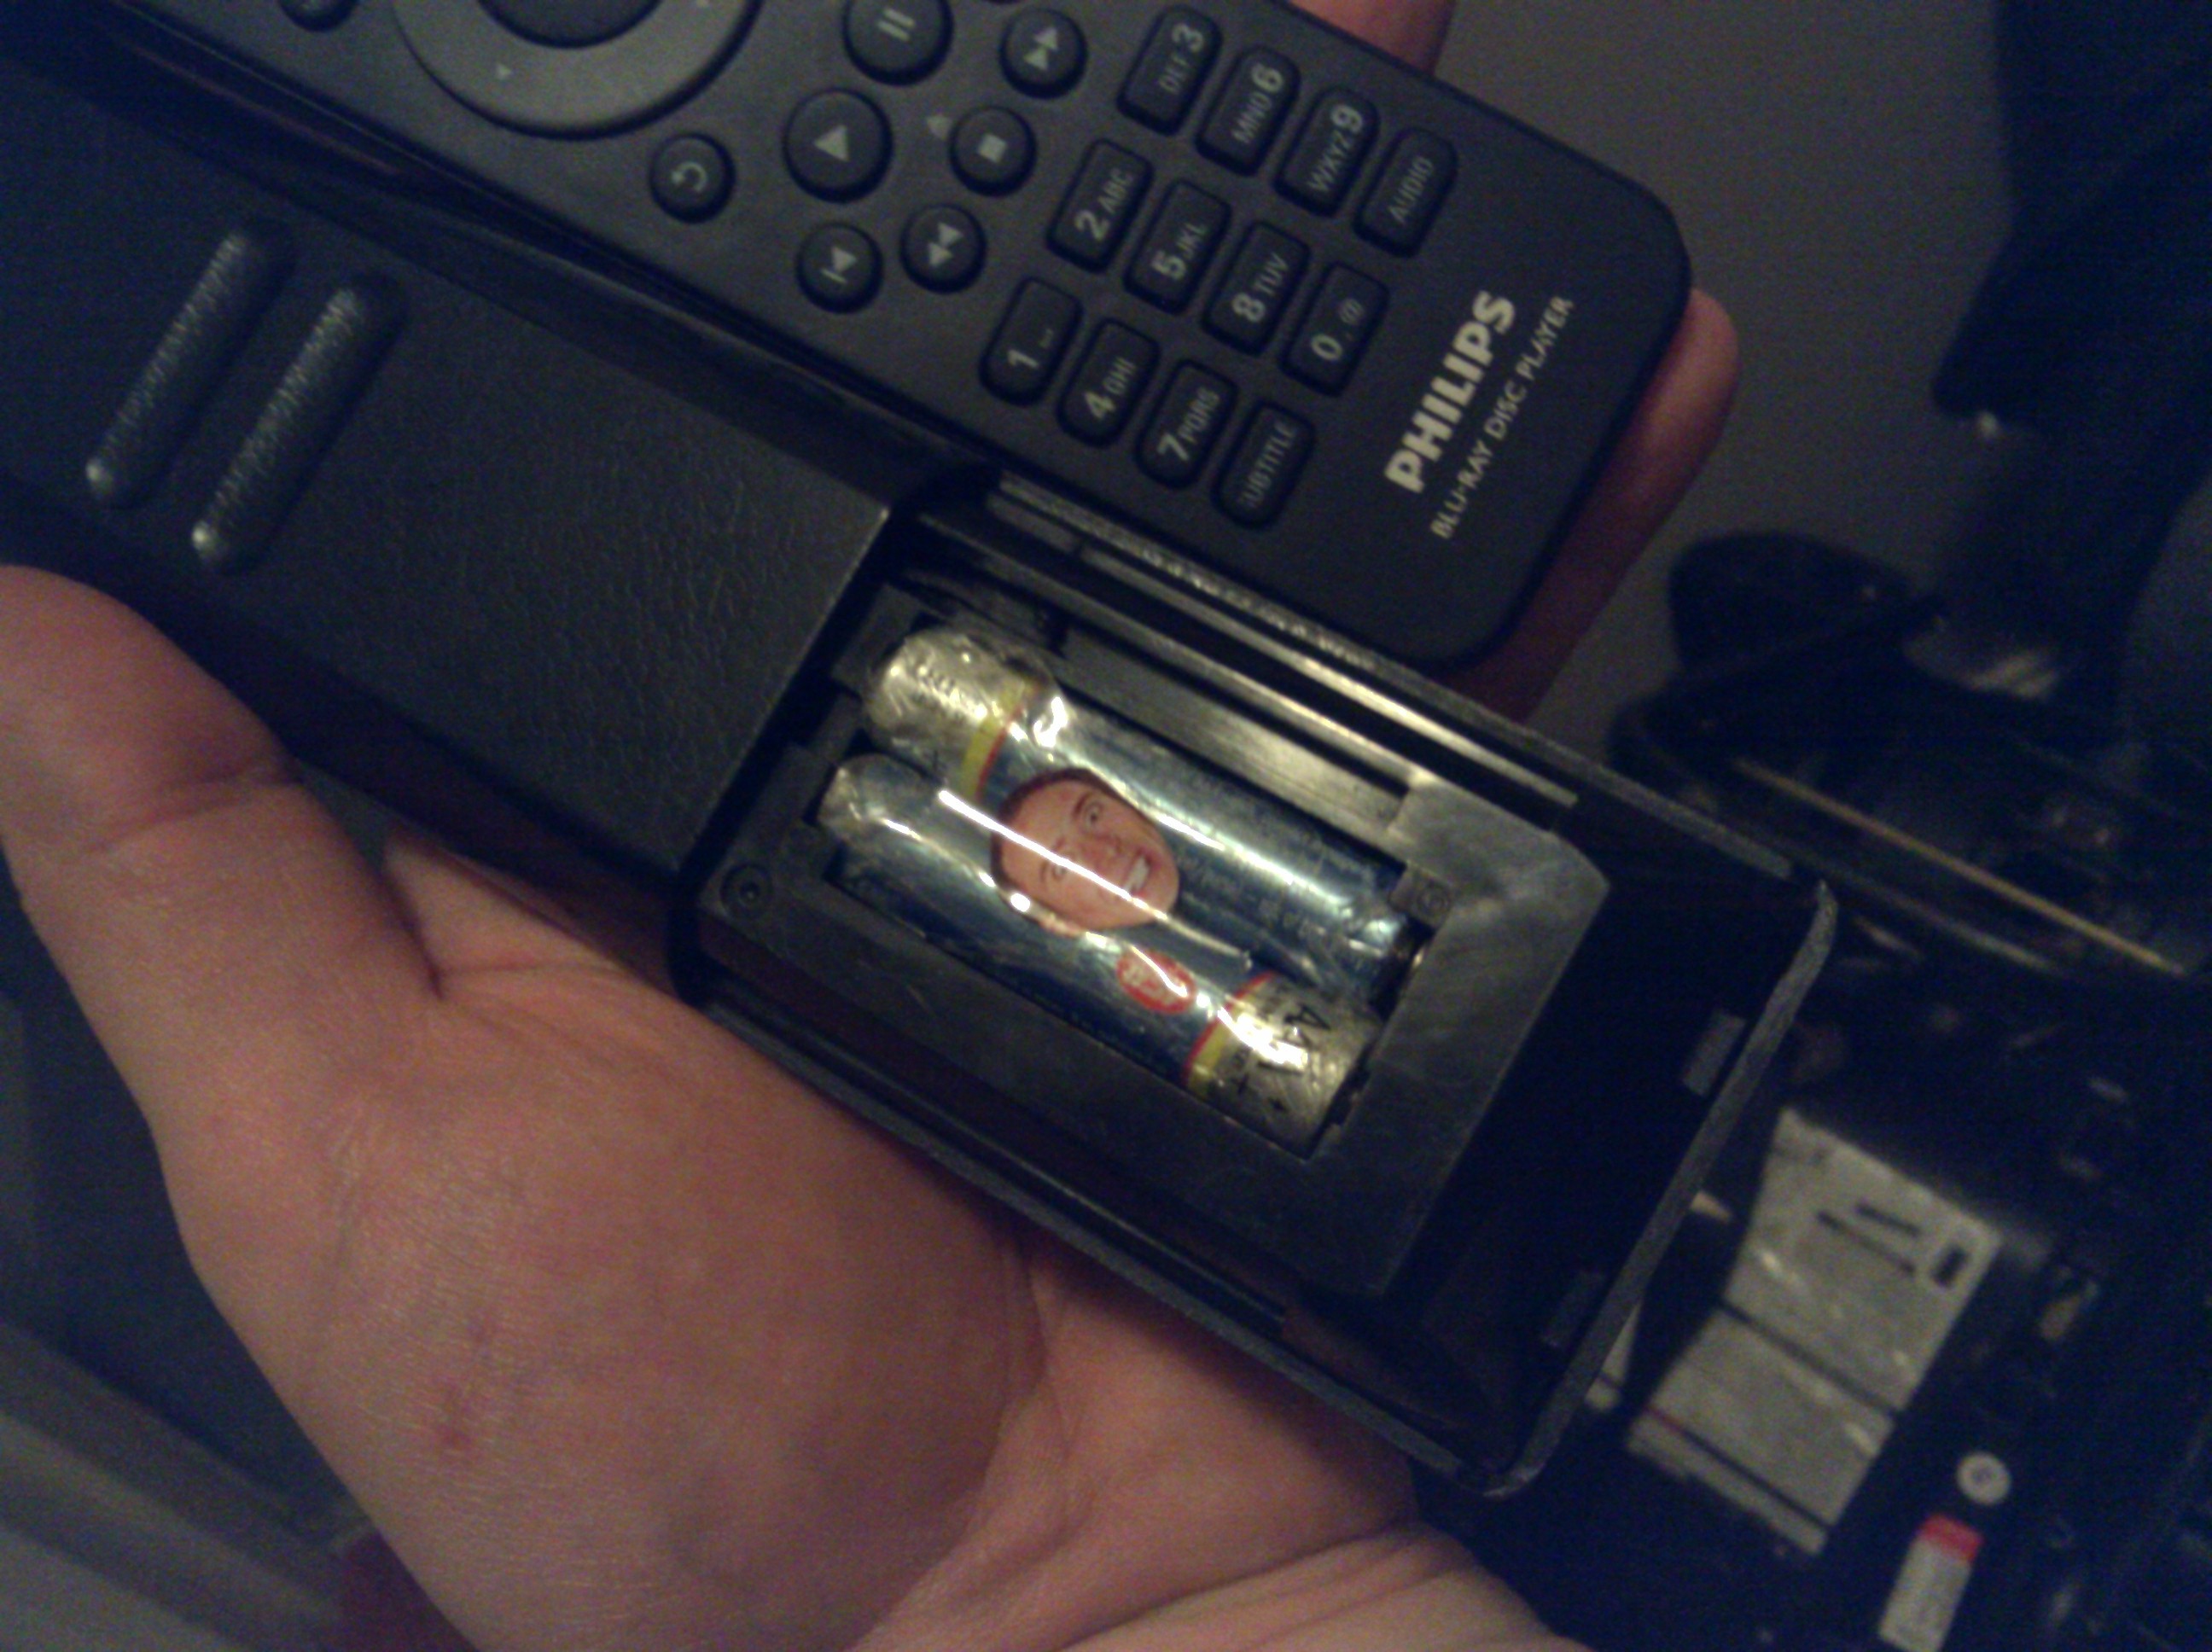 He couldn't work out why the remote wasn't working. We had wrapped the batteries in tape as well